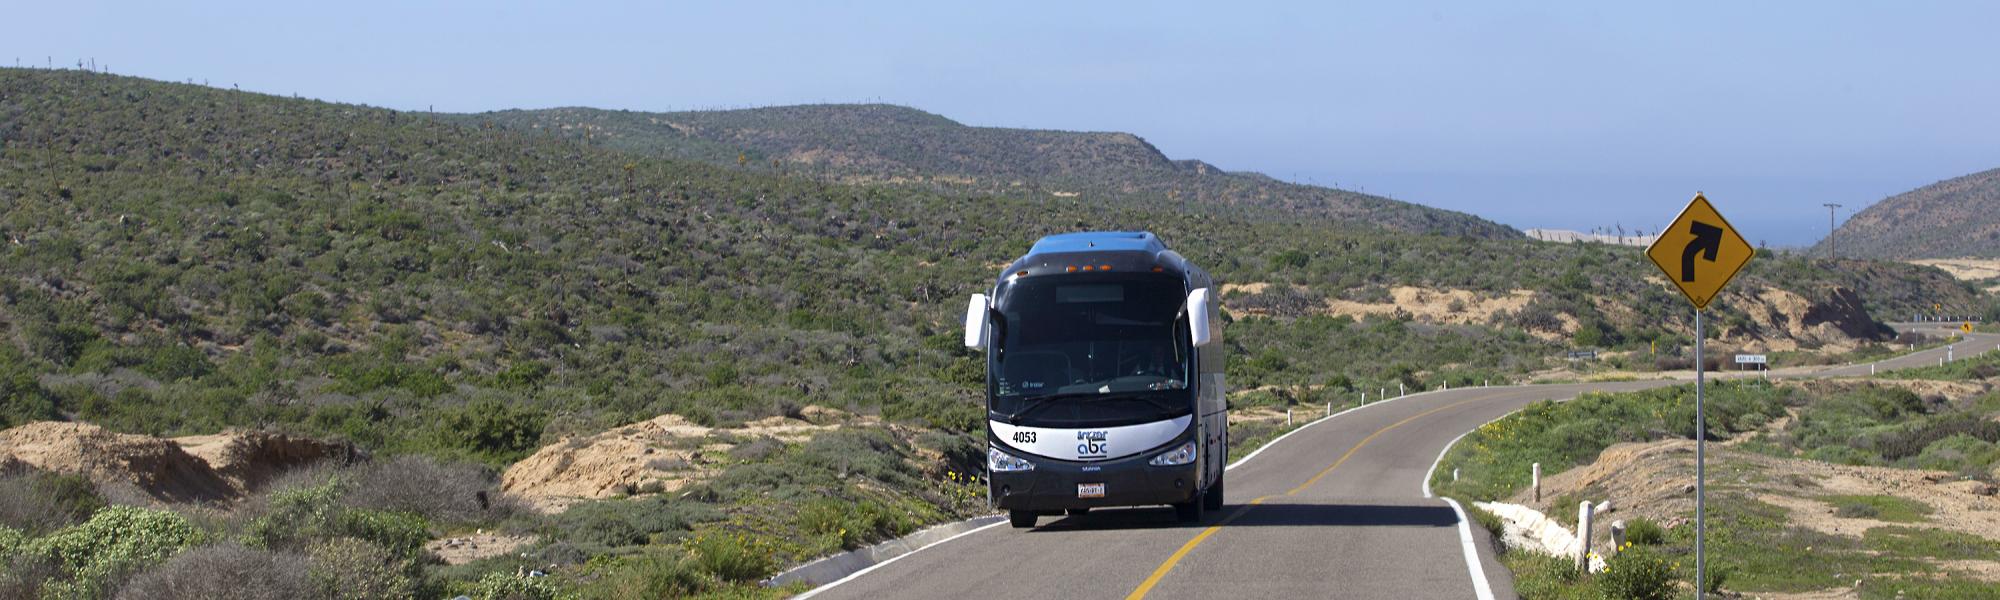 tourist bus on road in Mexico